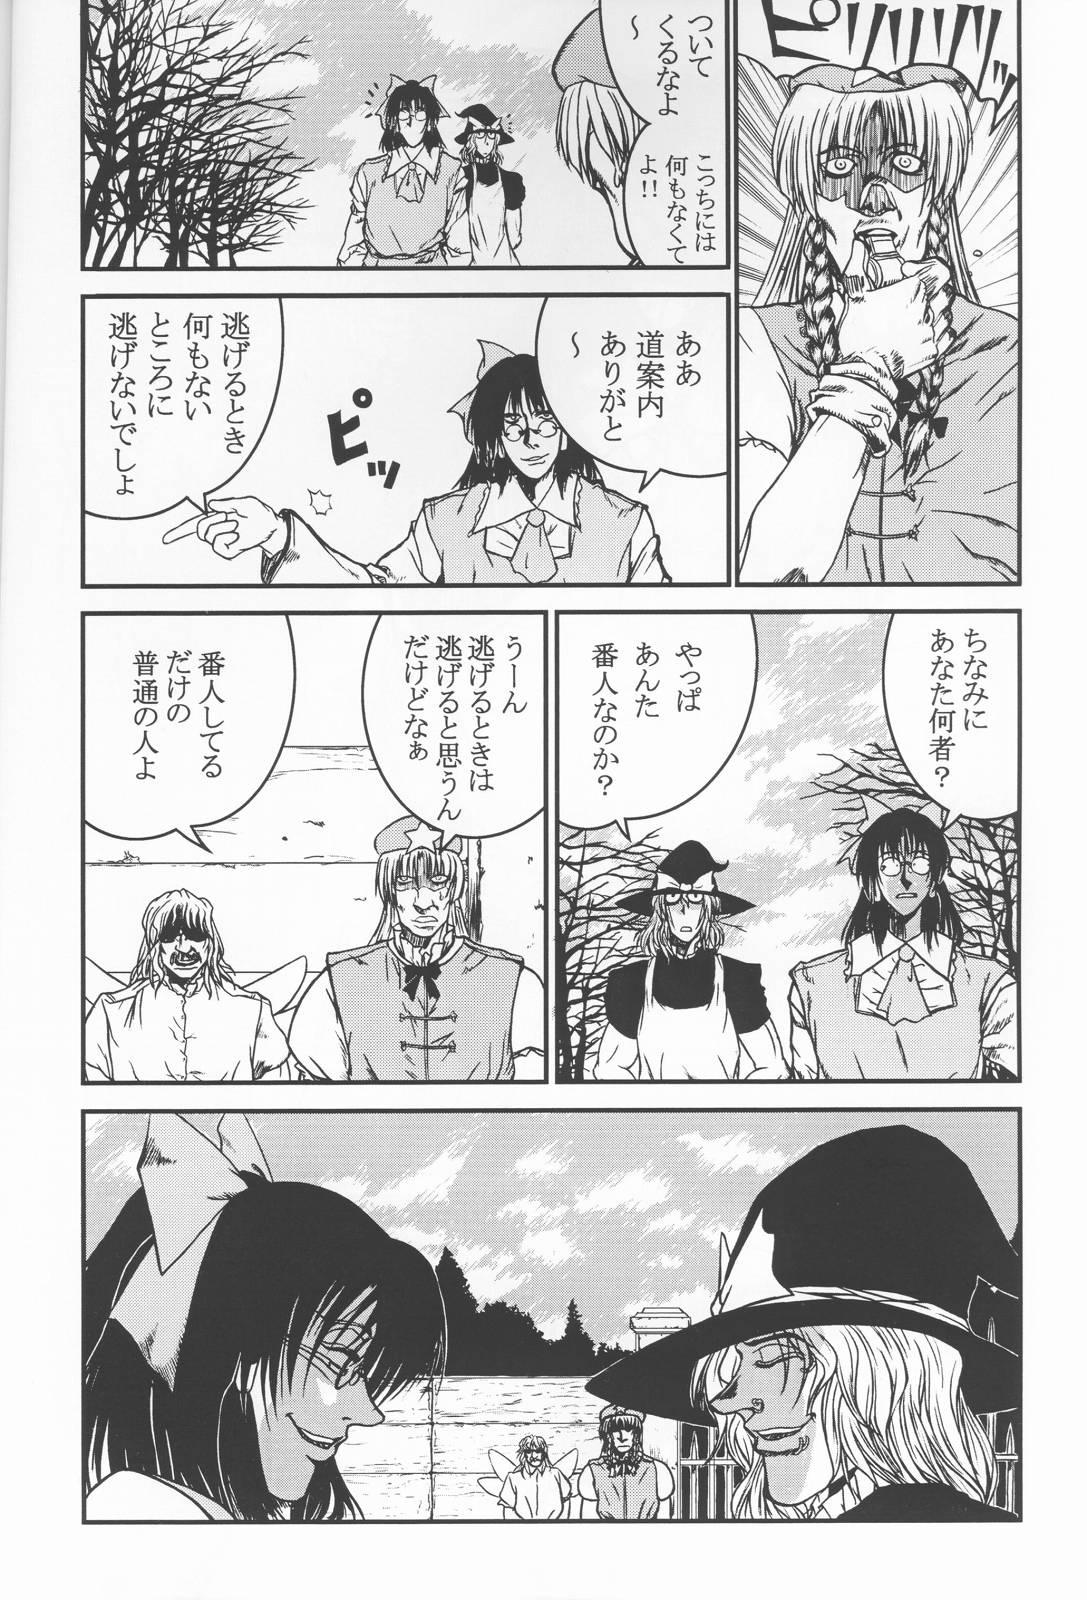 Cut HELLSING？ - Touhou project Shemales - Page 7